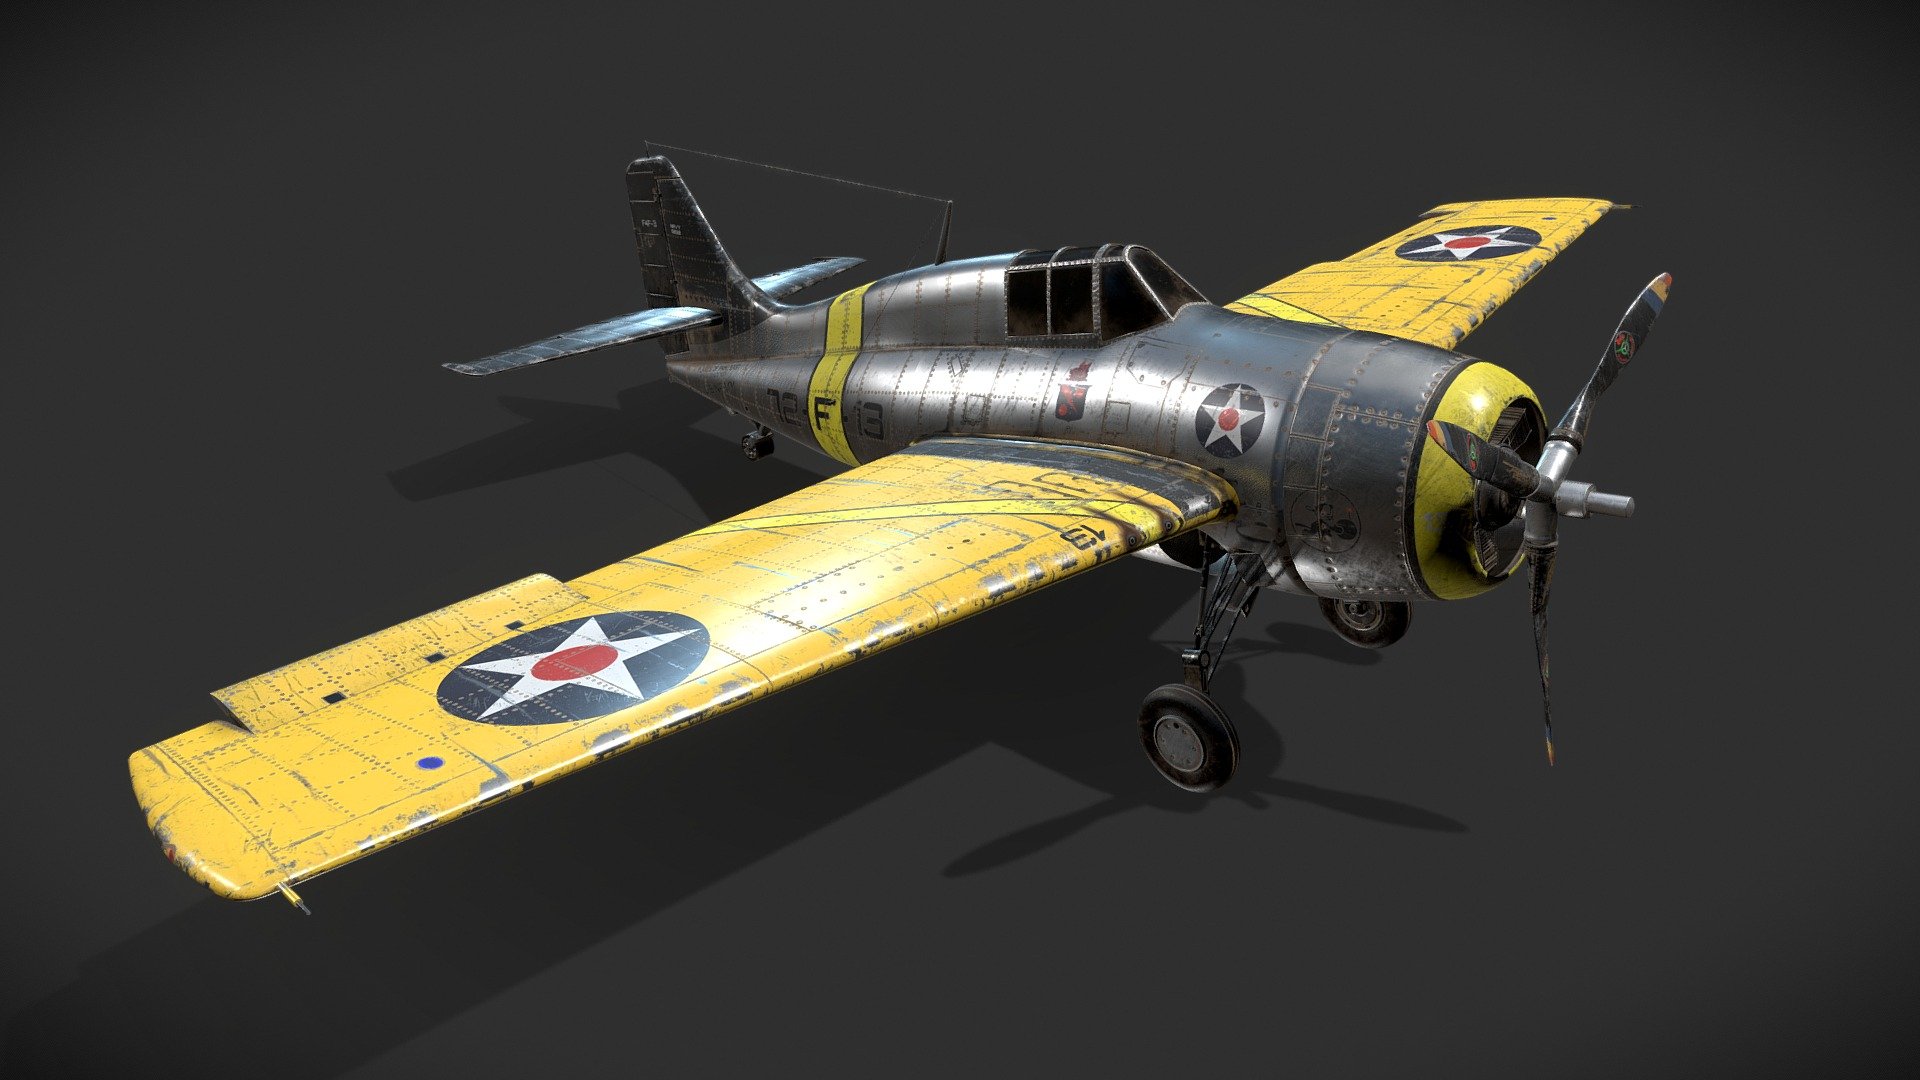 Grumman F4F-3 Wildcat scratched  (In House Project)
Game Ready Asset.
Modeling Unwrapping texturing done from scratch . 
Highpoly baked
by 13 Particles.

For more artworks and updates follow us on:-

Instagram:- https://www.instagram.com/13particles/

Artstation:- https://thirteenparticles.artstation.com

Twitter:- https://twitter.com/13Particles

Facebook:- https://www.facebook.com/13Particles/

Linkedin:- https://www.linkedin.com/company/13particles - Grumman F4F-3 Wildcat  (In House Project) - 3D model by 13 Particles (@13particles) 3d model